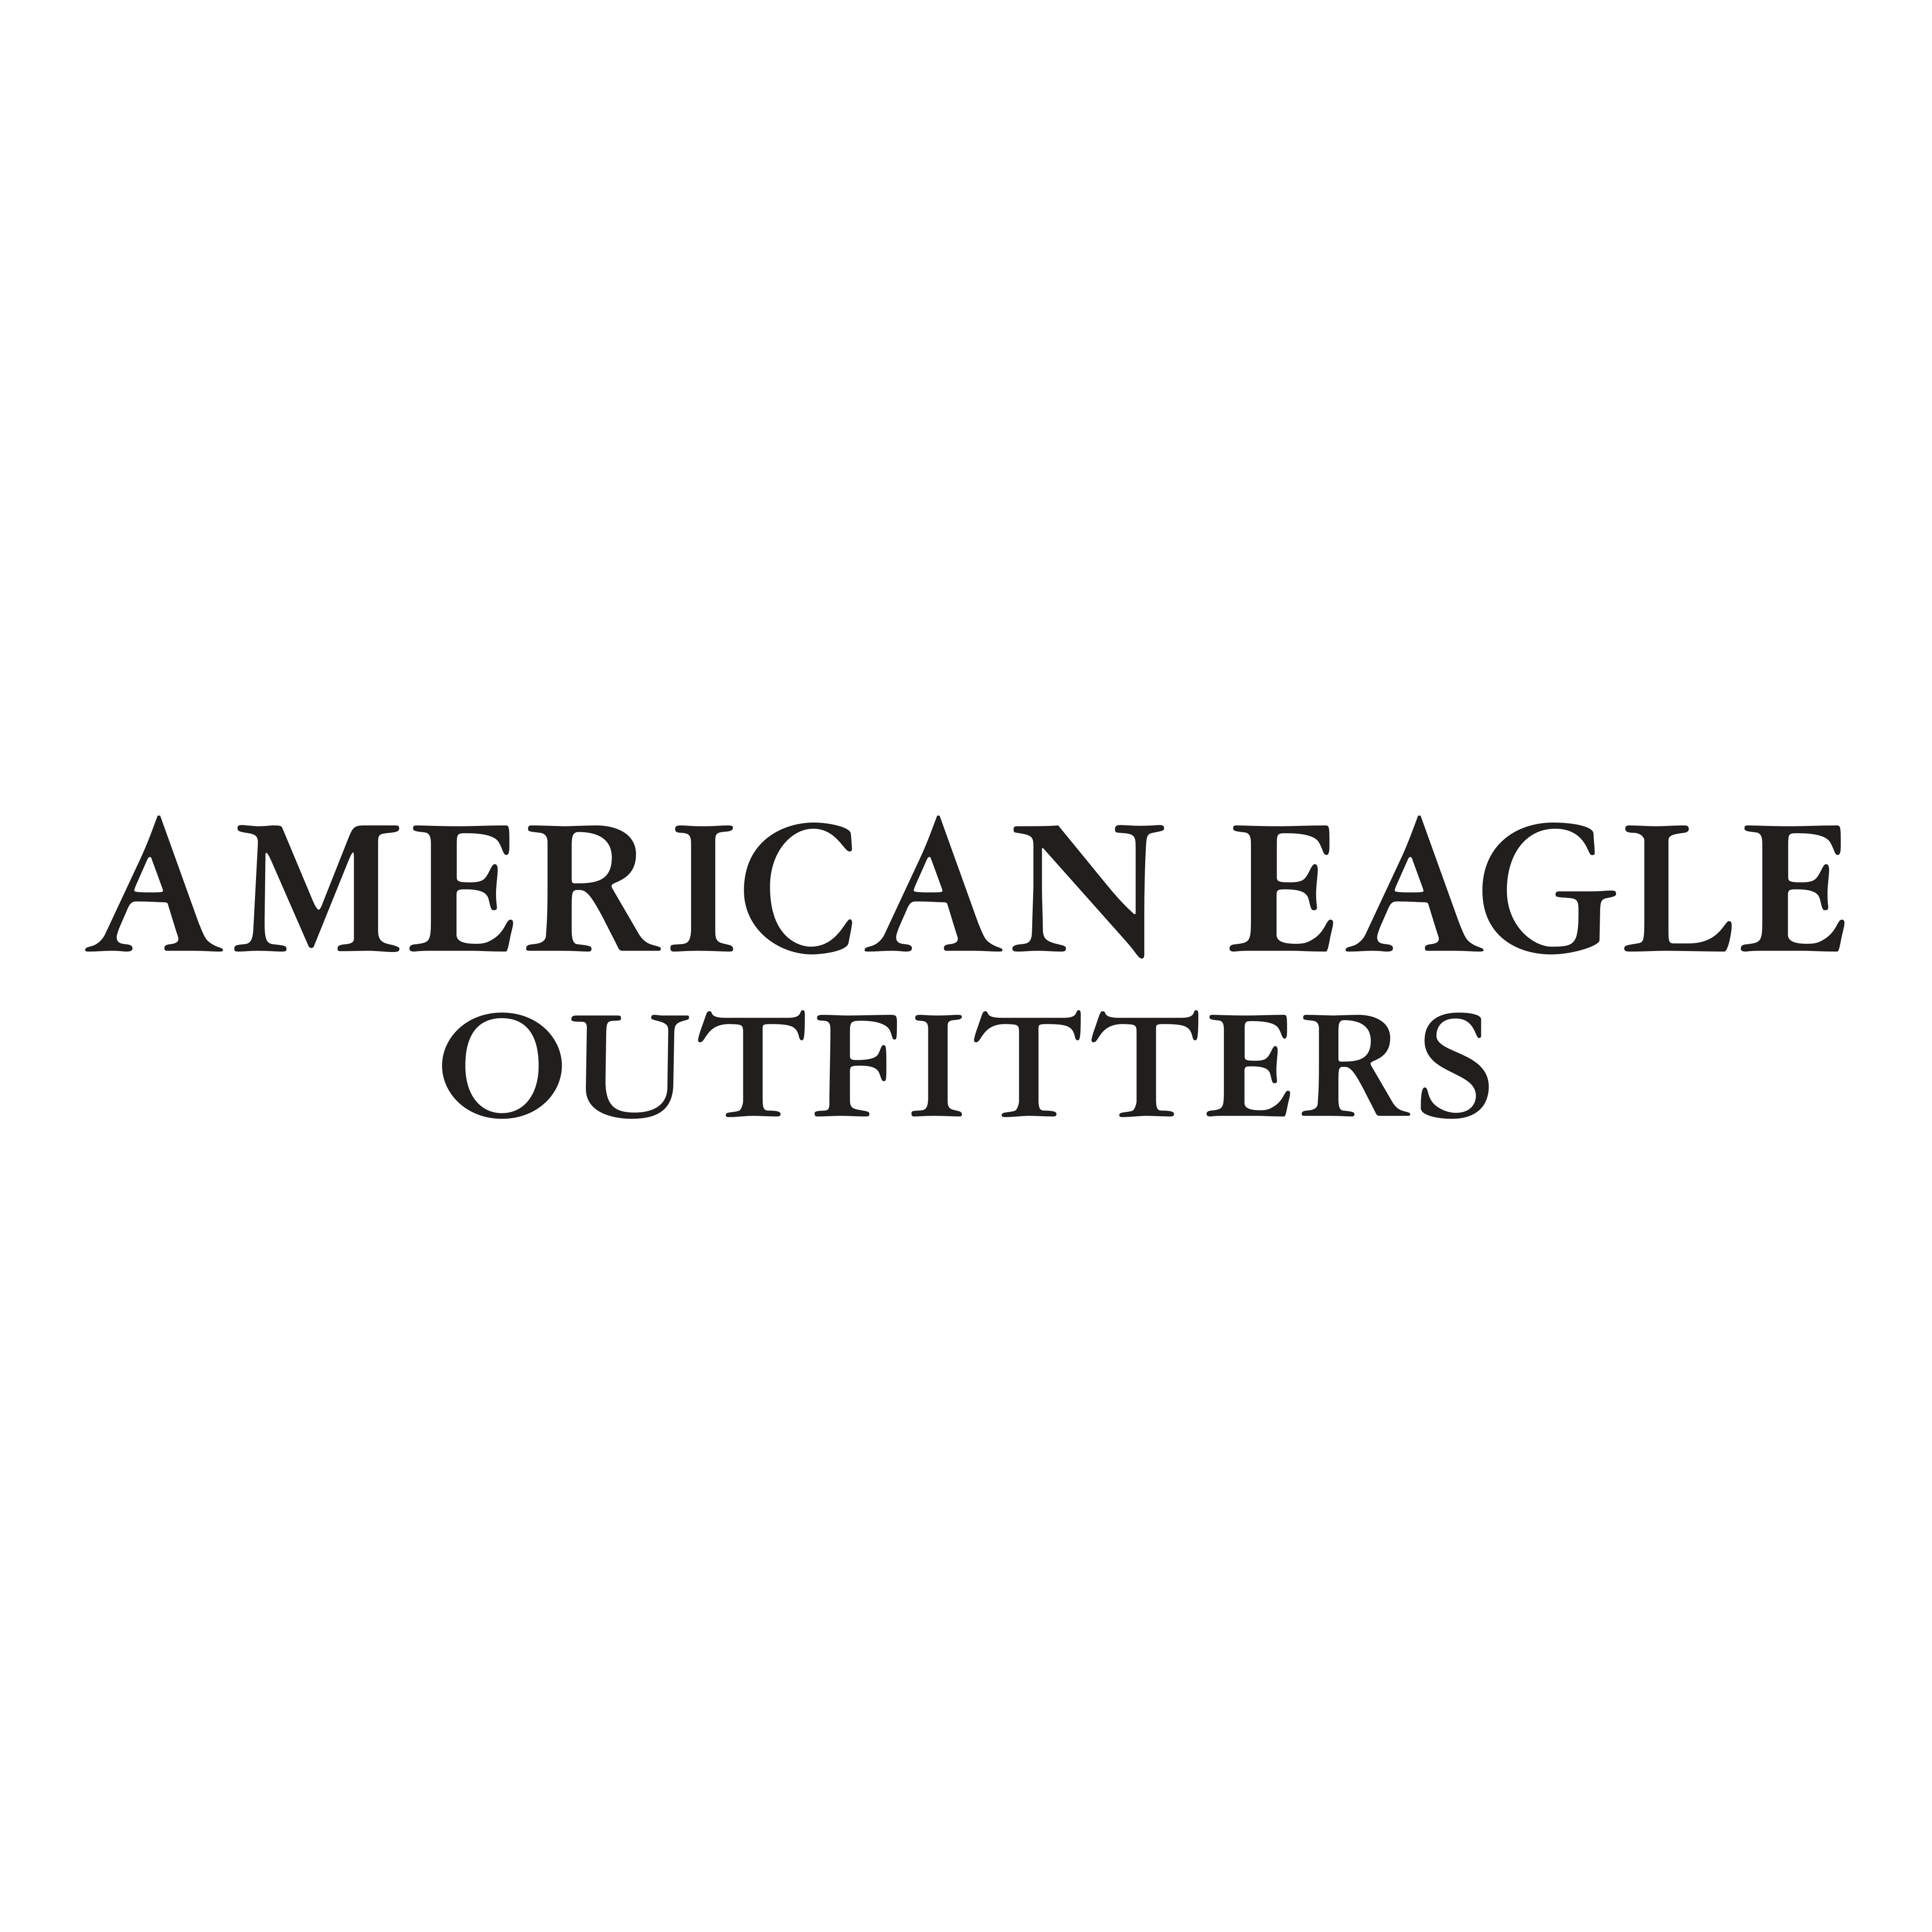 American Eagle Outfitters logo - download.